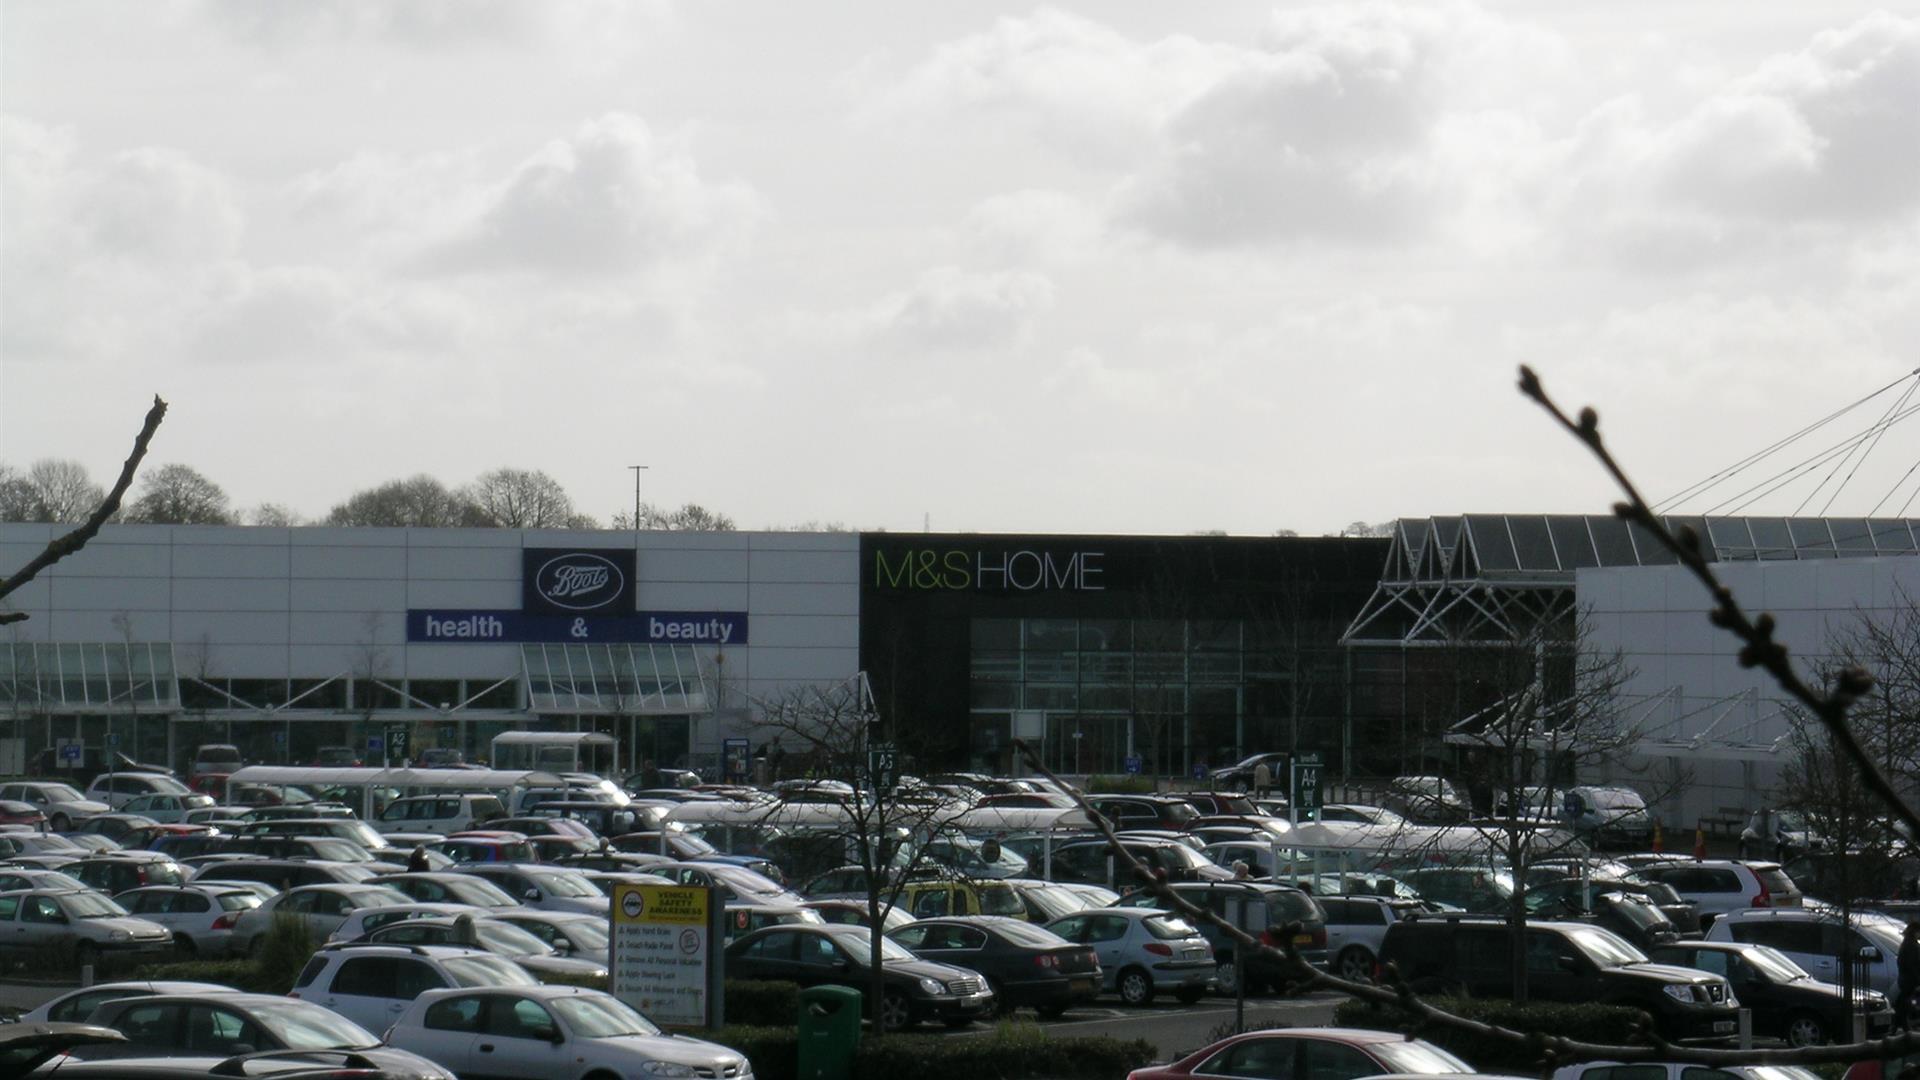 Image is of shop units and car park full of cars